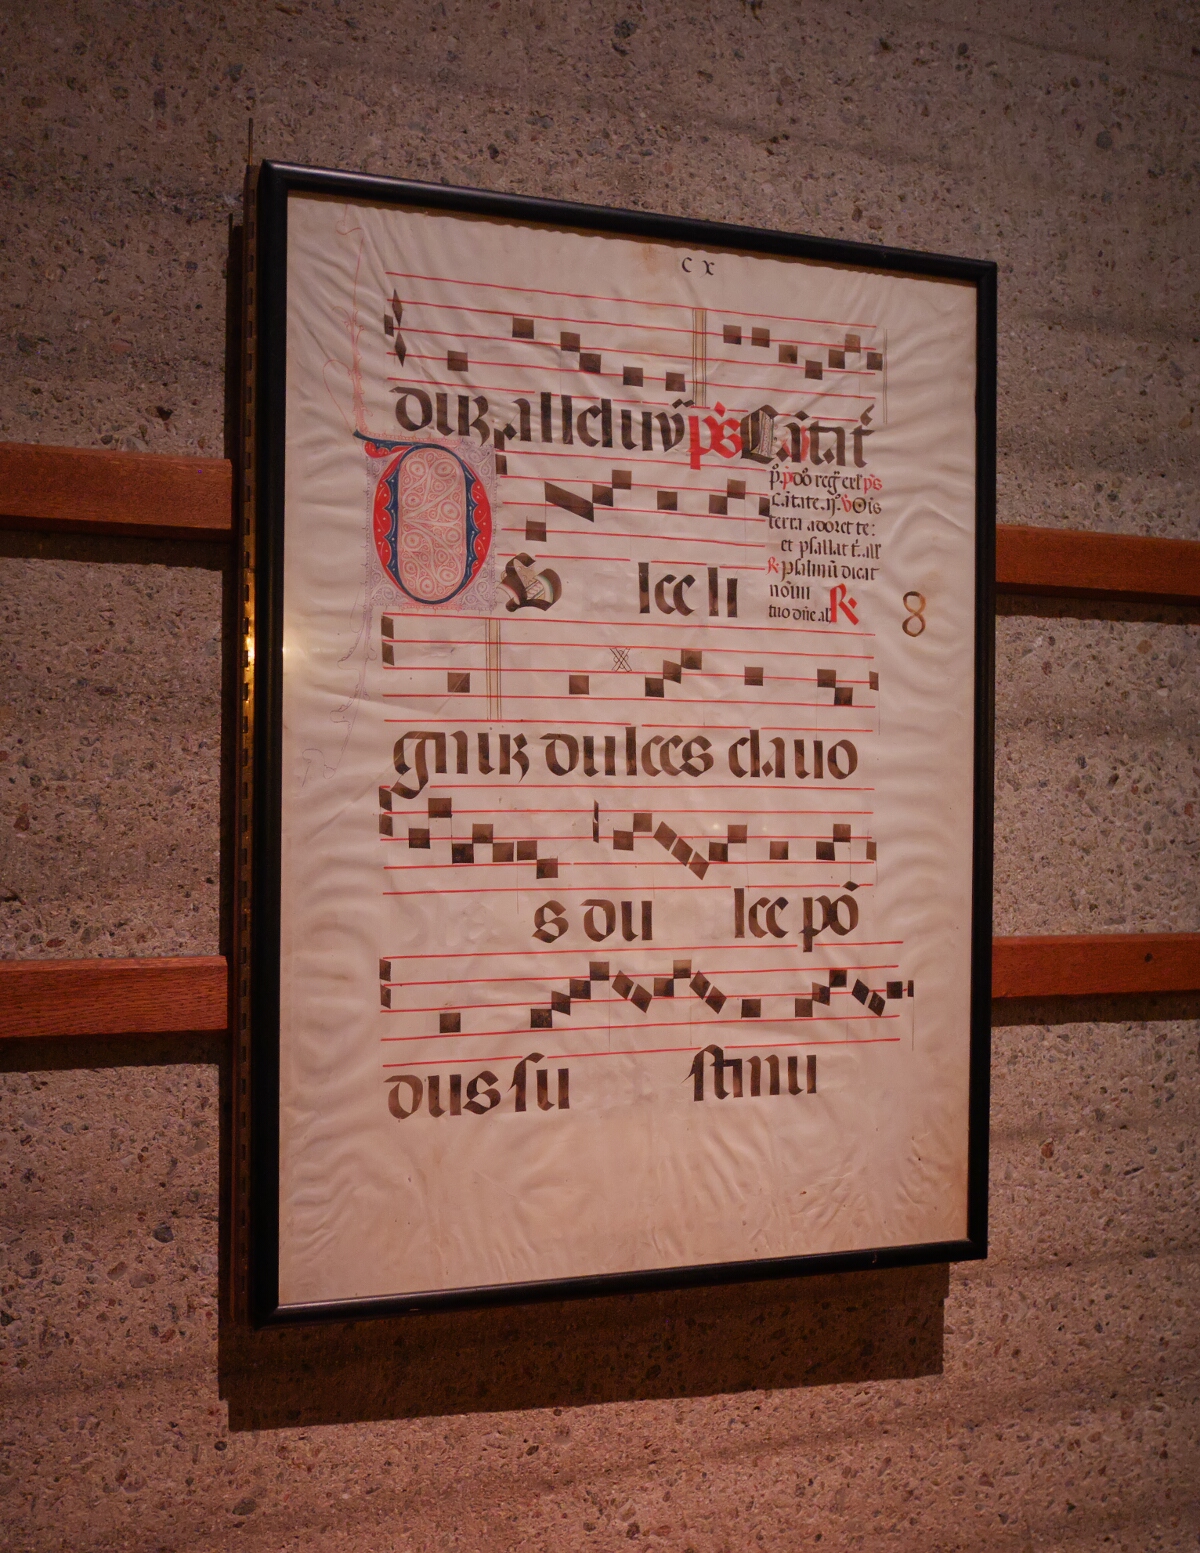 Some archaic musical notation mounted on the wall.